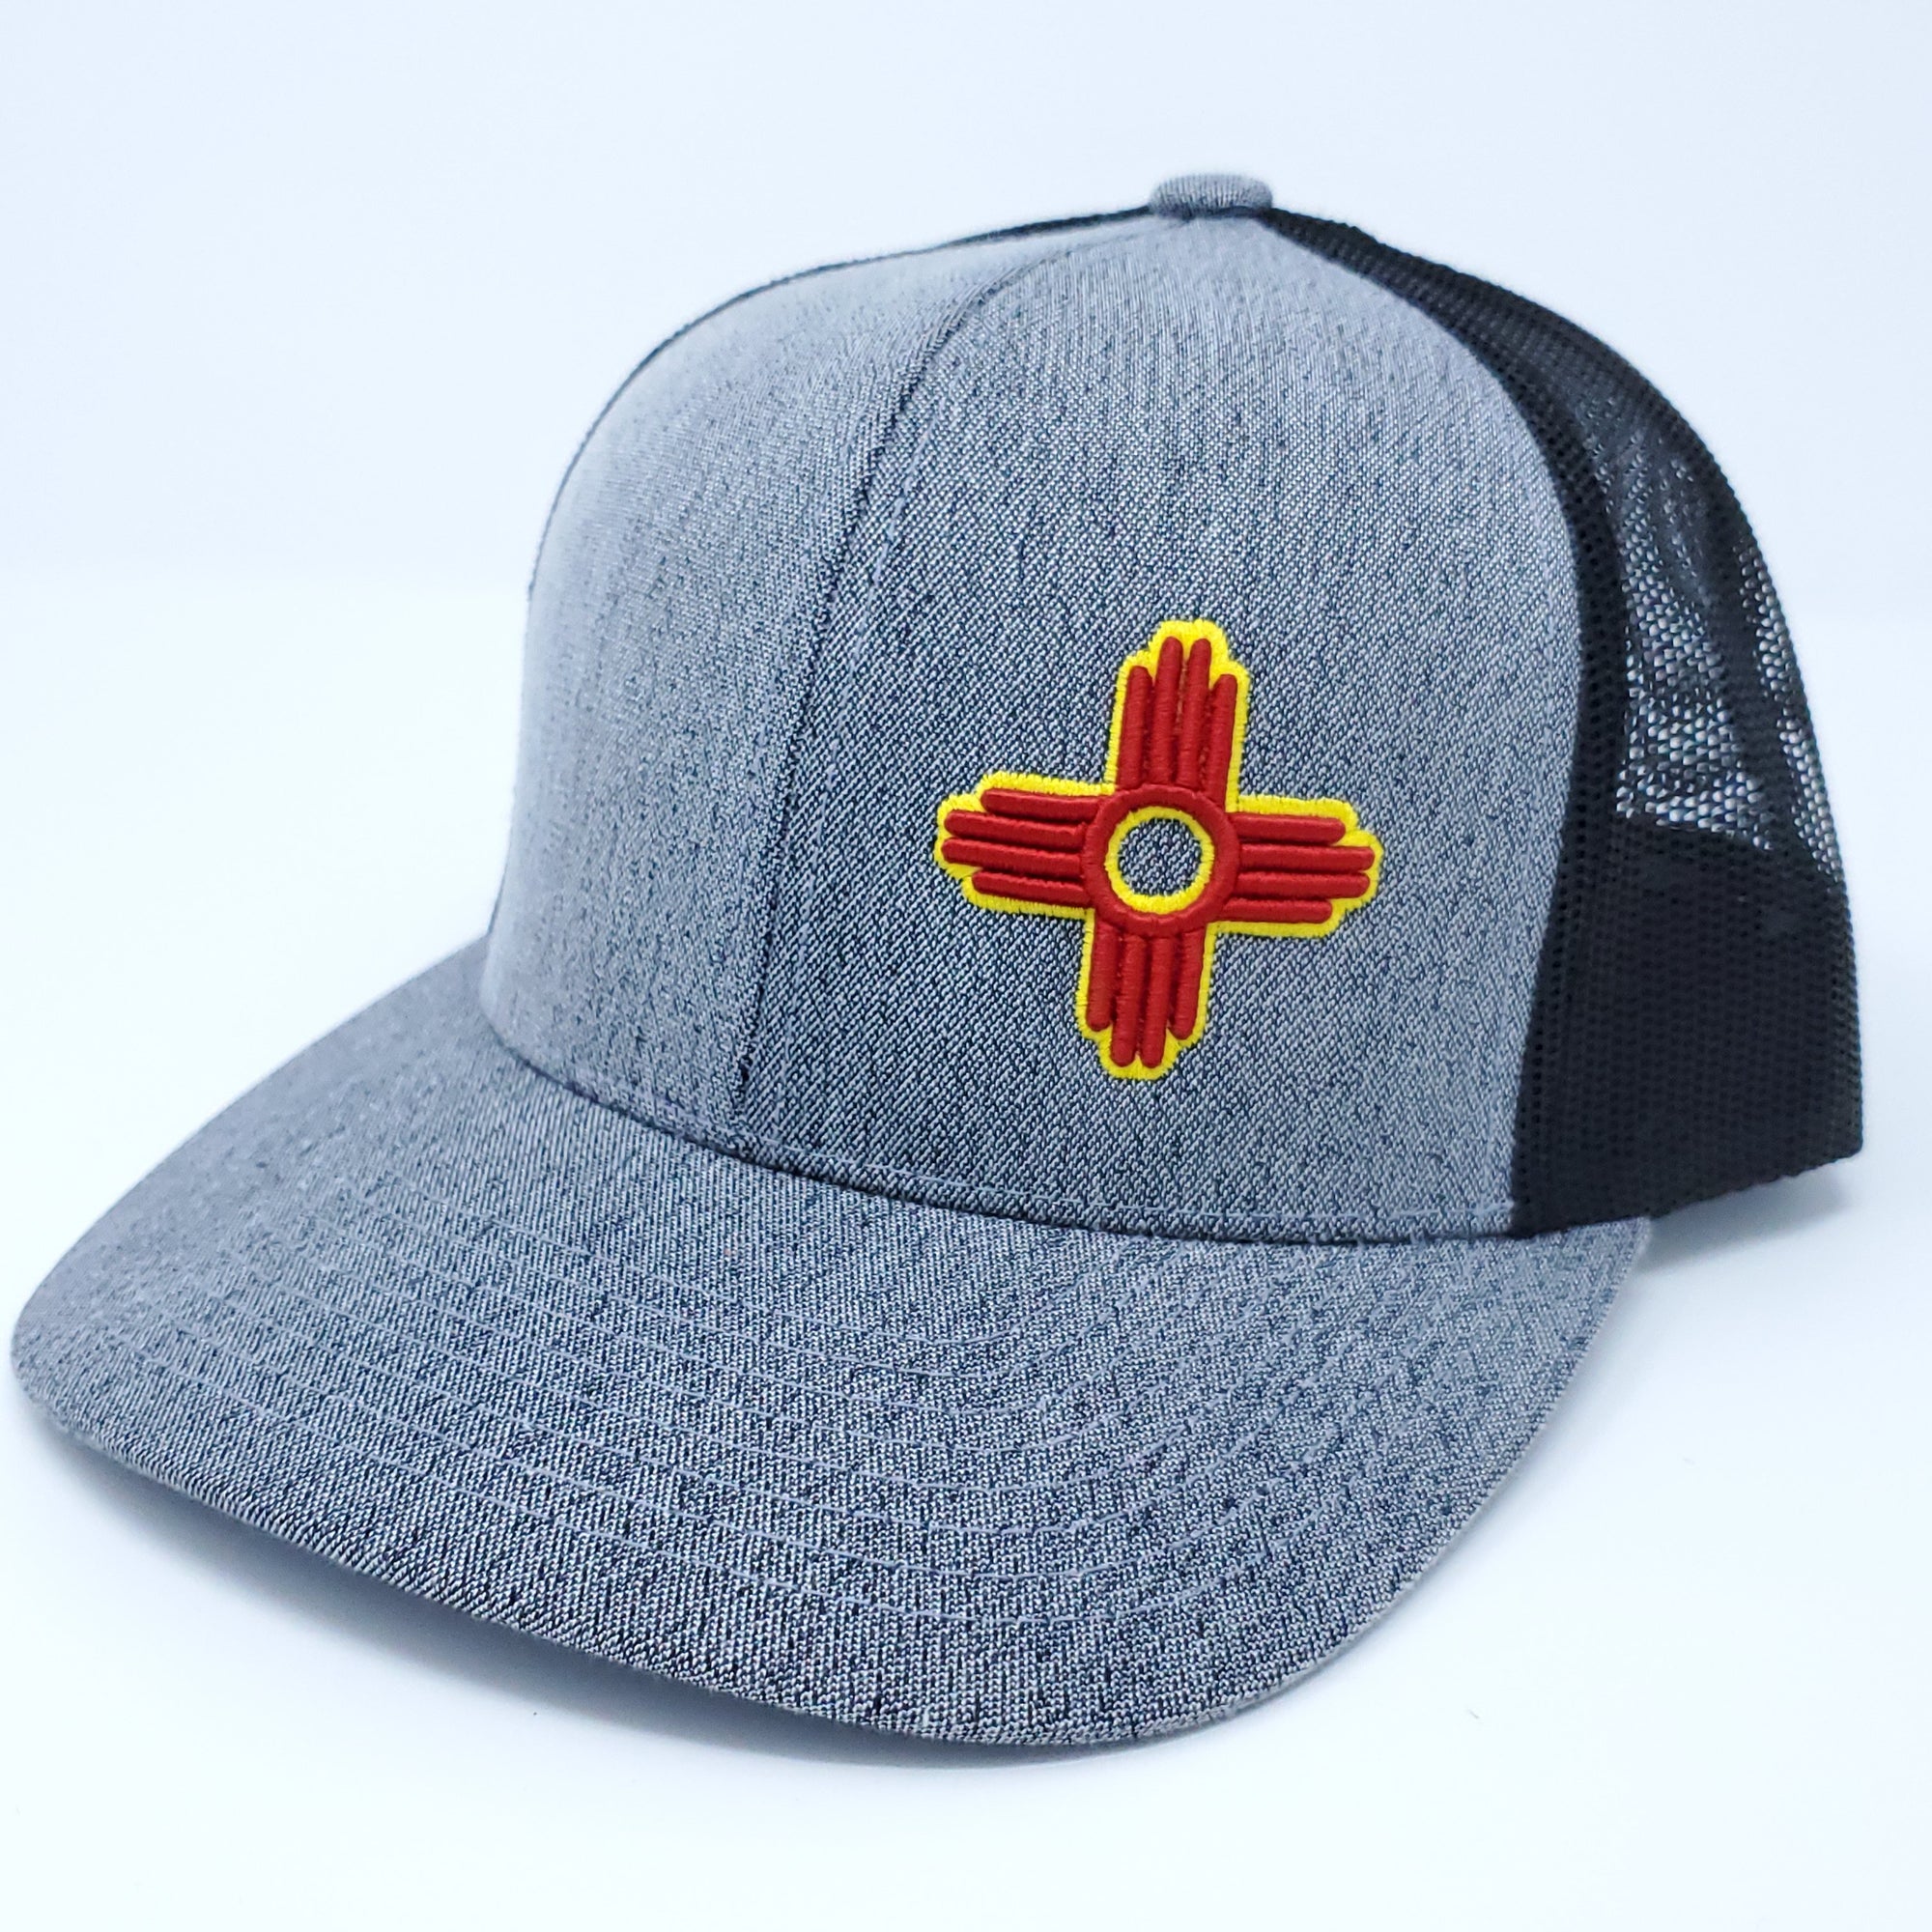 Heather Grey Zia Embroidered Trucker Style Snapback - Ragged Apparel Screen Printing and Signs - www.nmshirts.com